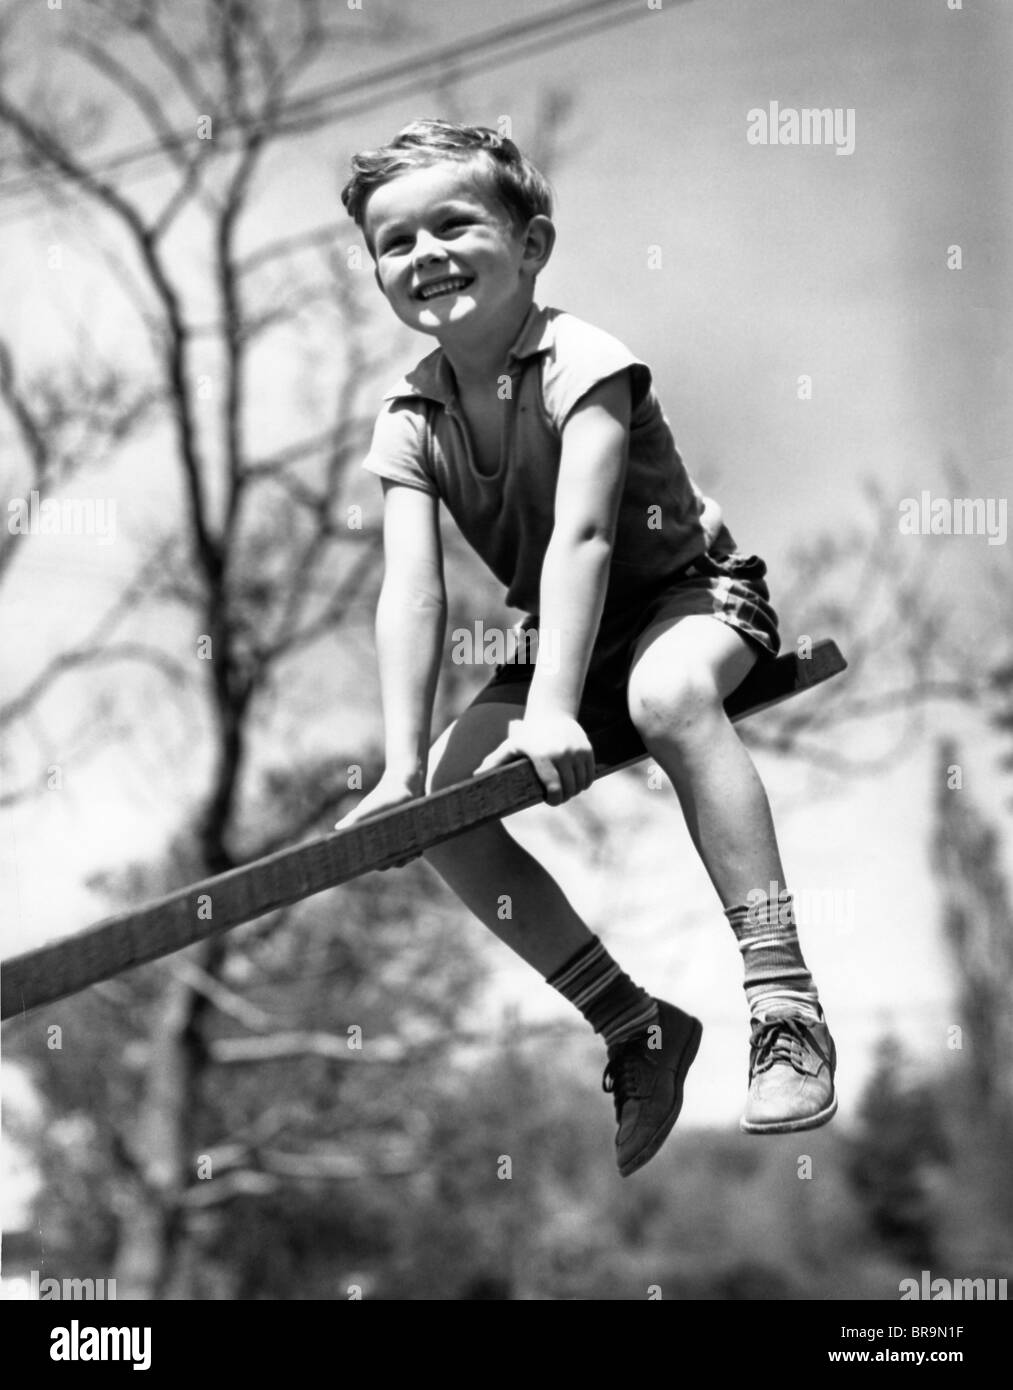 1930s SMILING BOY SITTING ON SEESAW Stock Photo